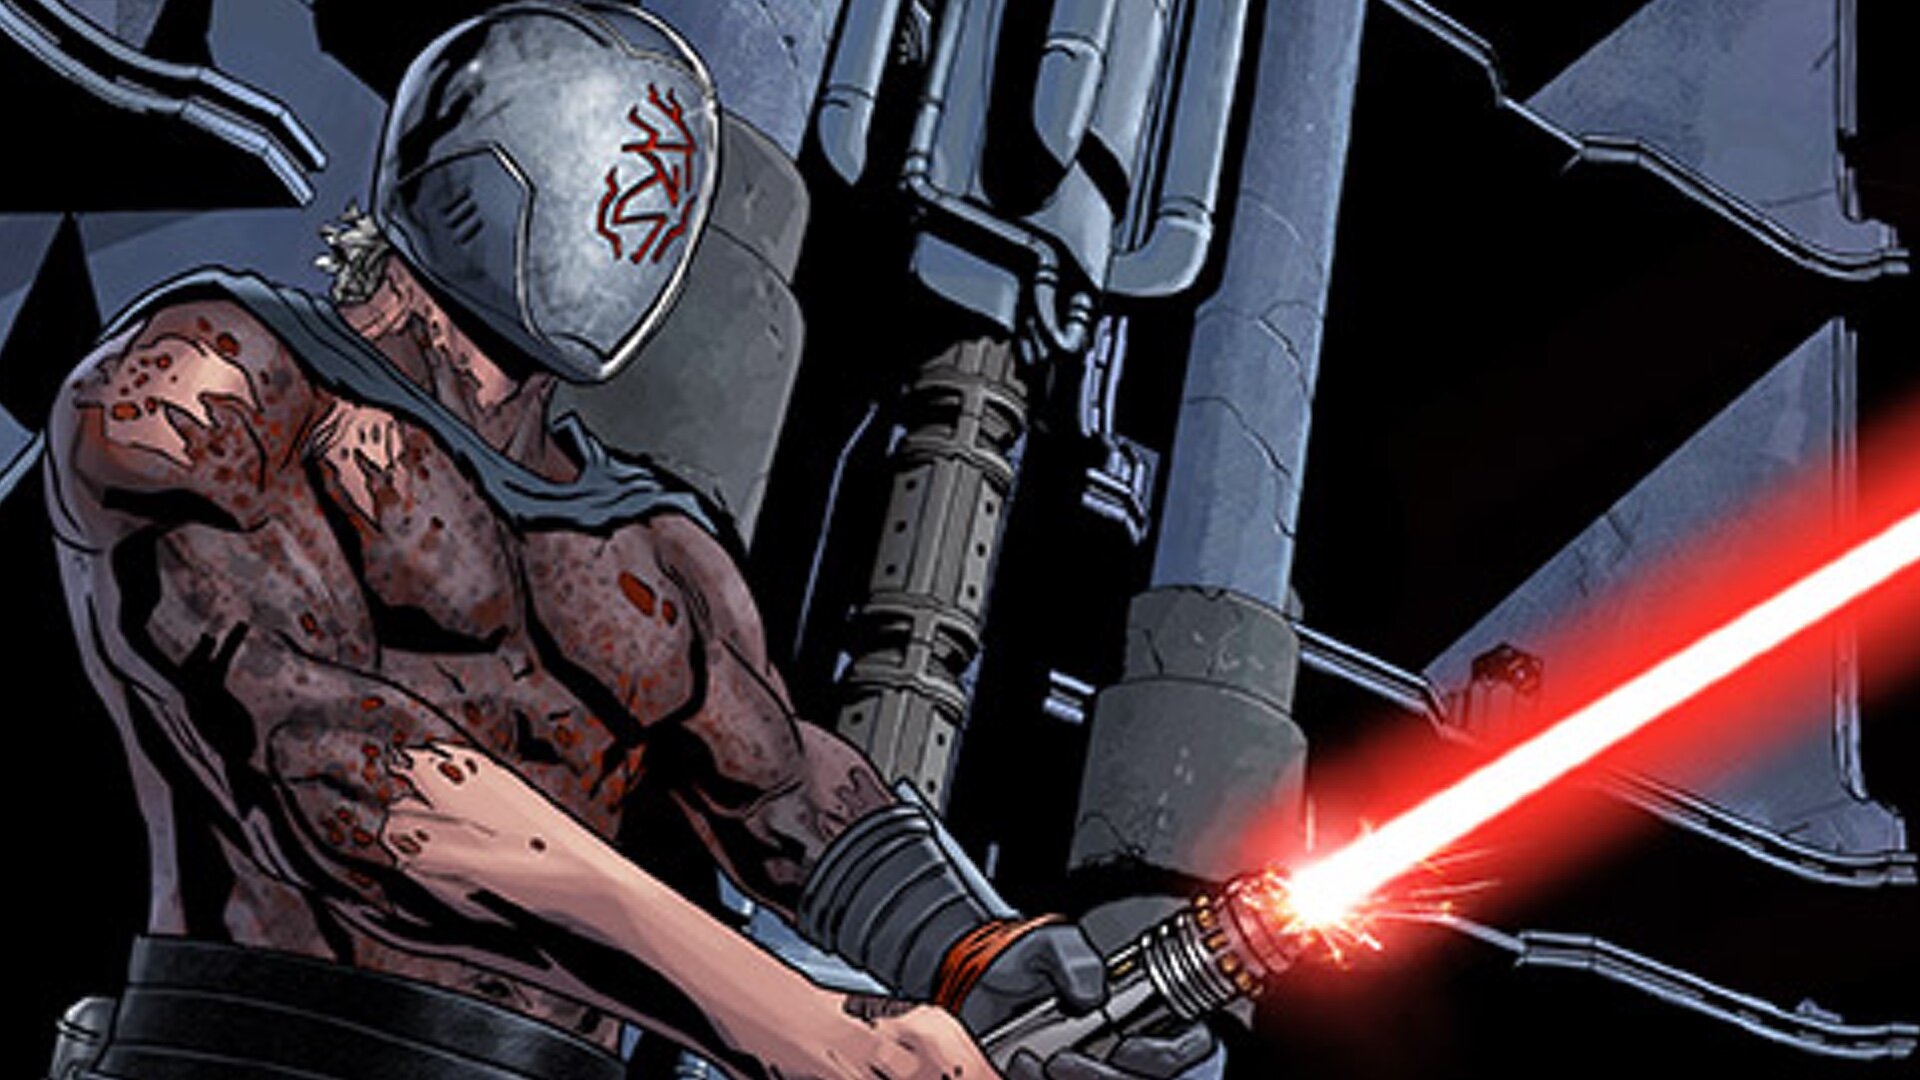 STAR WARS: THE RISE OF KYLO REN Introduces Ren, the Character Who Feeds